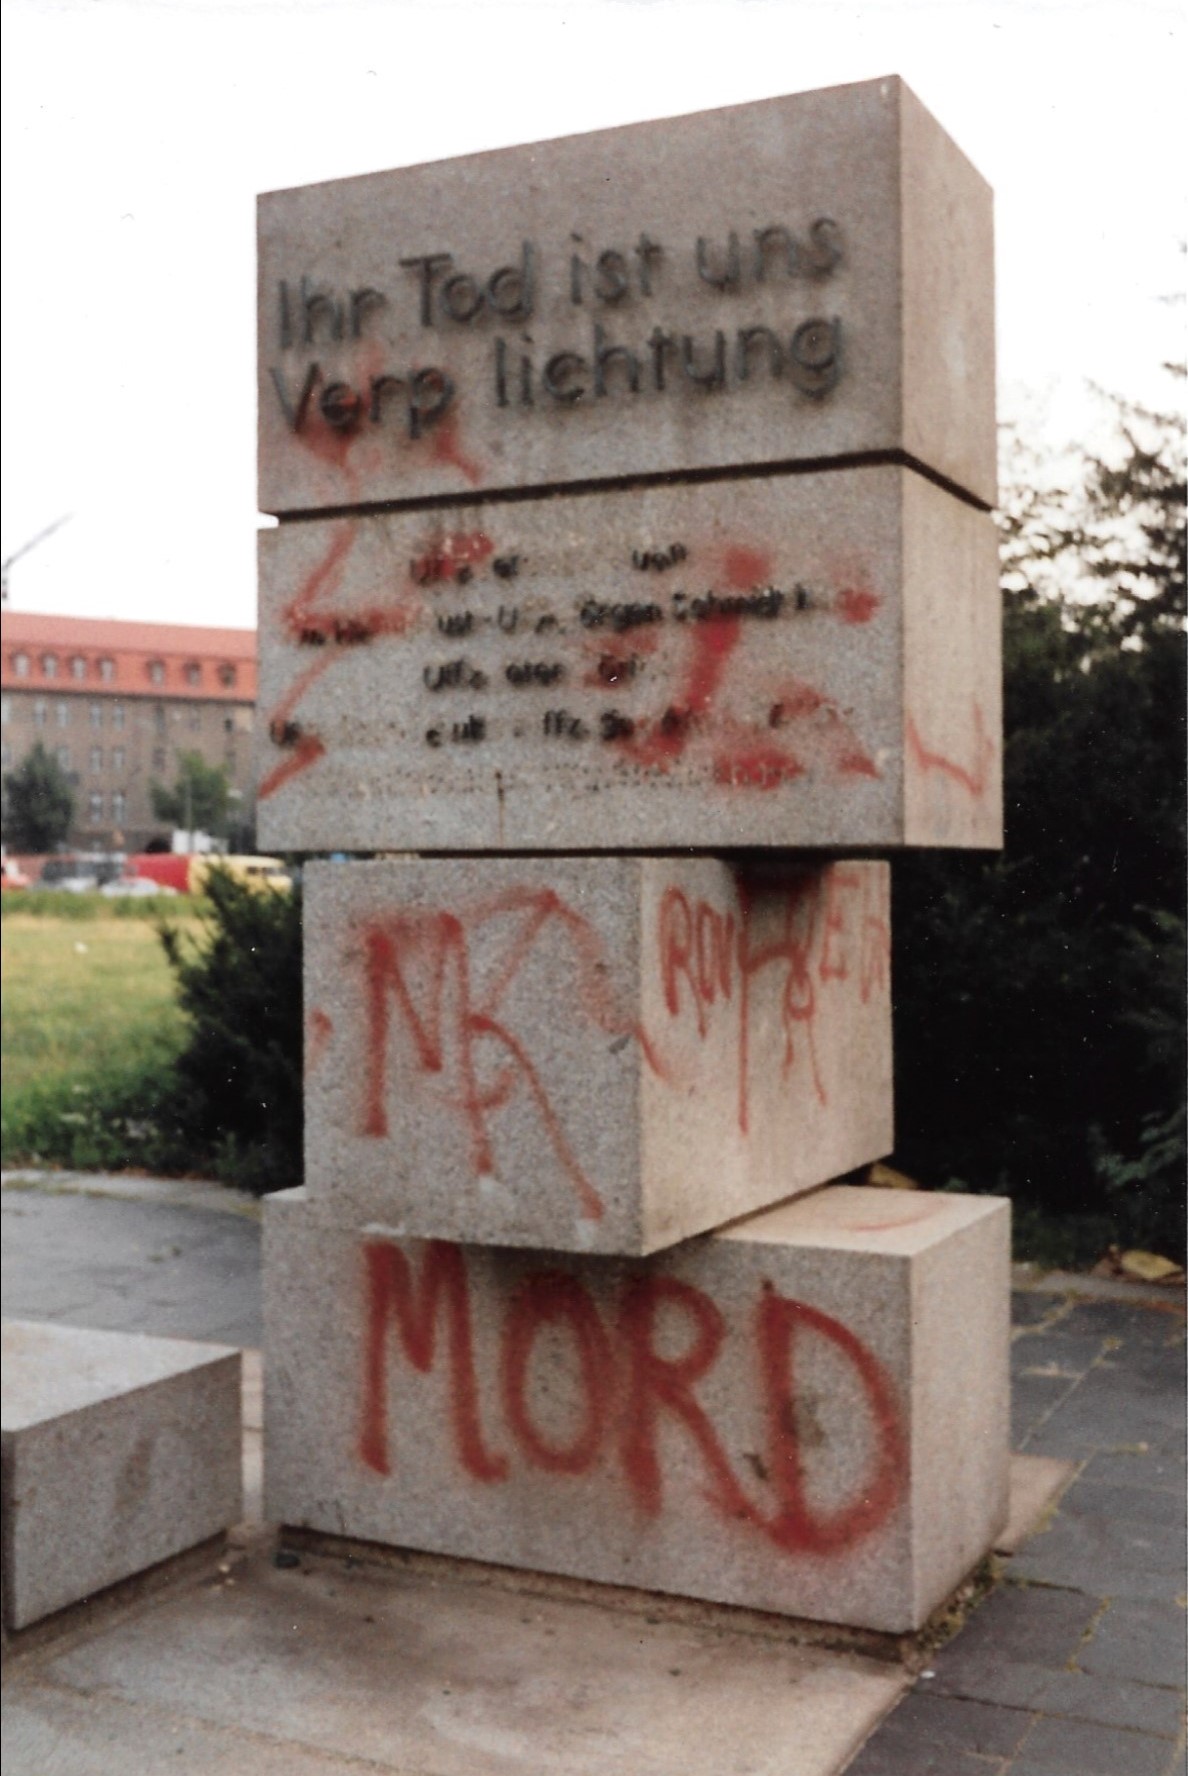 The SED memorial to fallen border guards, Jerusalemer Strasse and Reinhold-Huhn Strasse, August 1991.